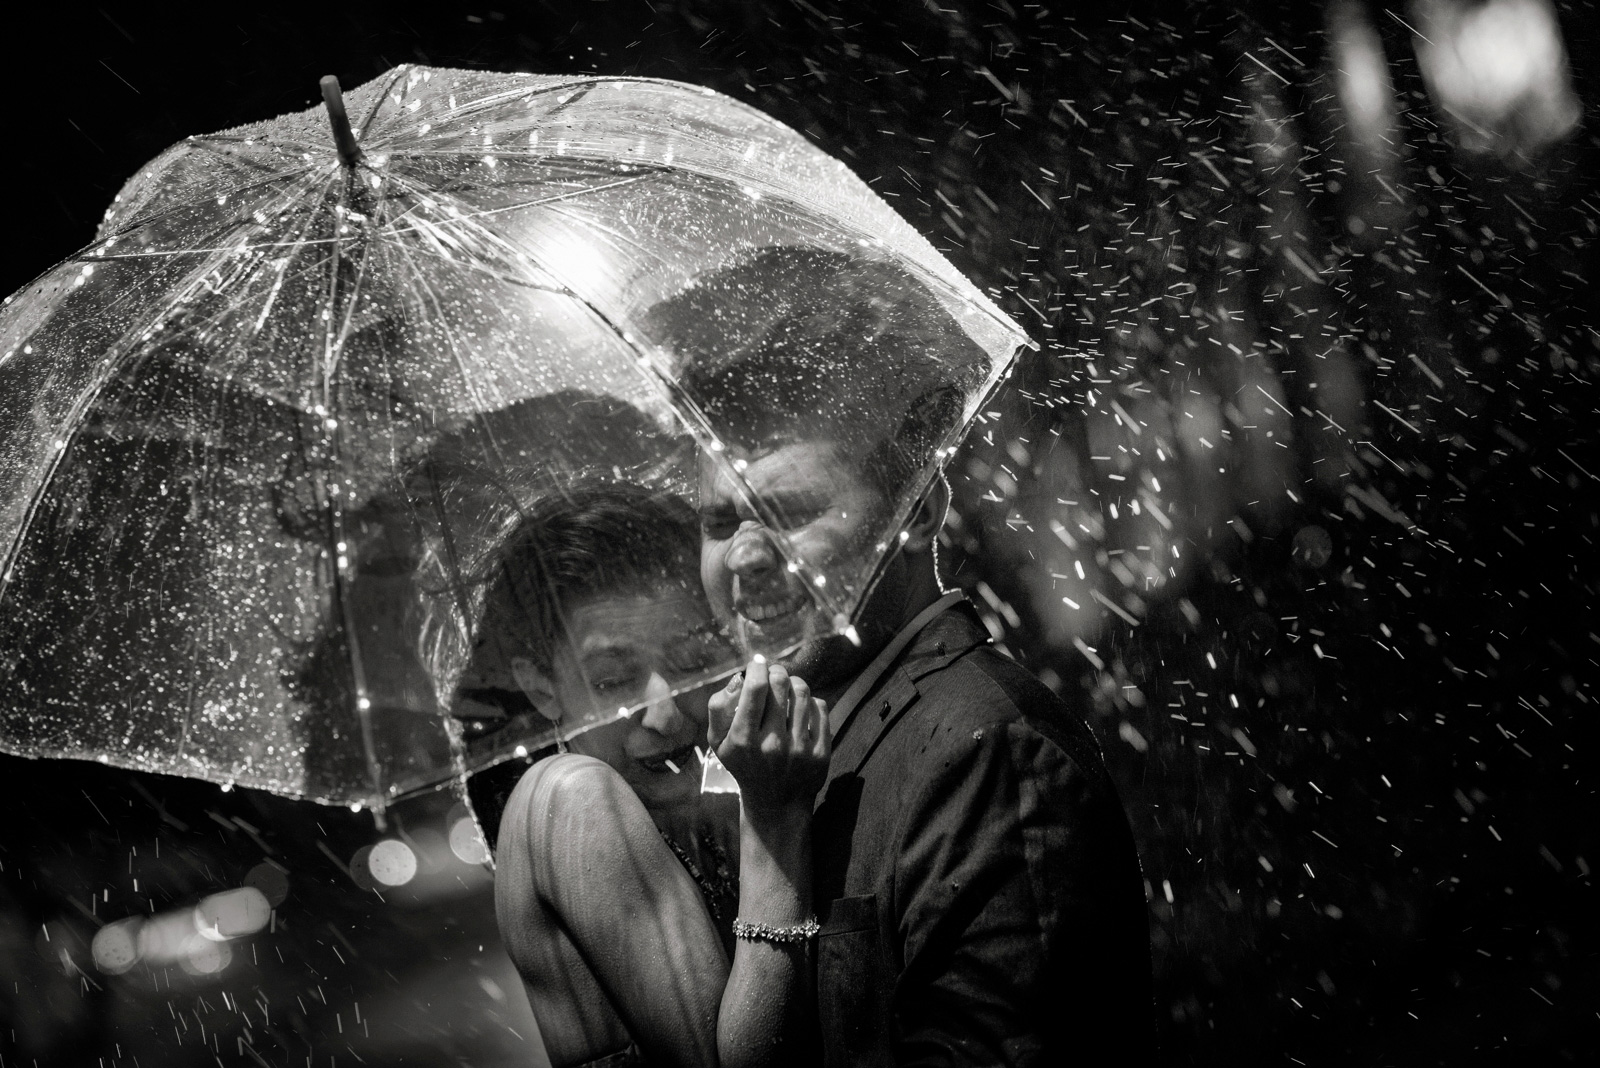 Latest 15 Romantic Photoshoot Ideas In The Rain To Inspire Your Pre-Wedding  And Post Wedding | by Weddingsjunction | Medium